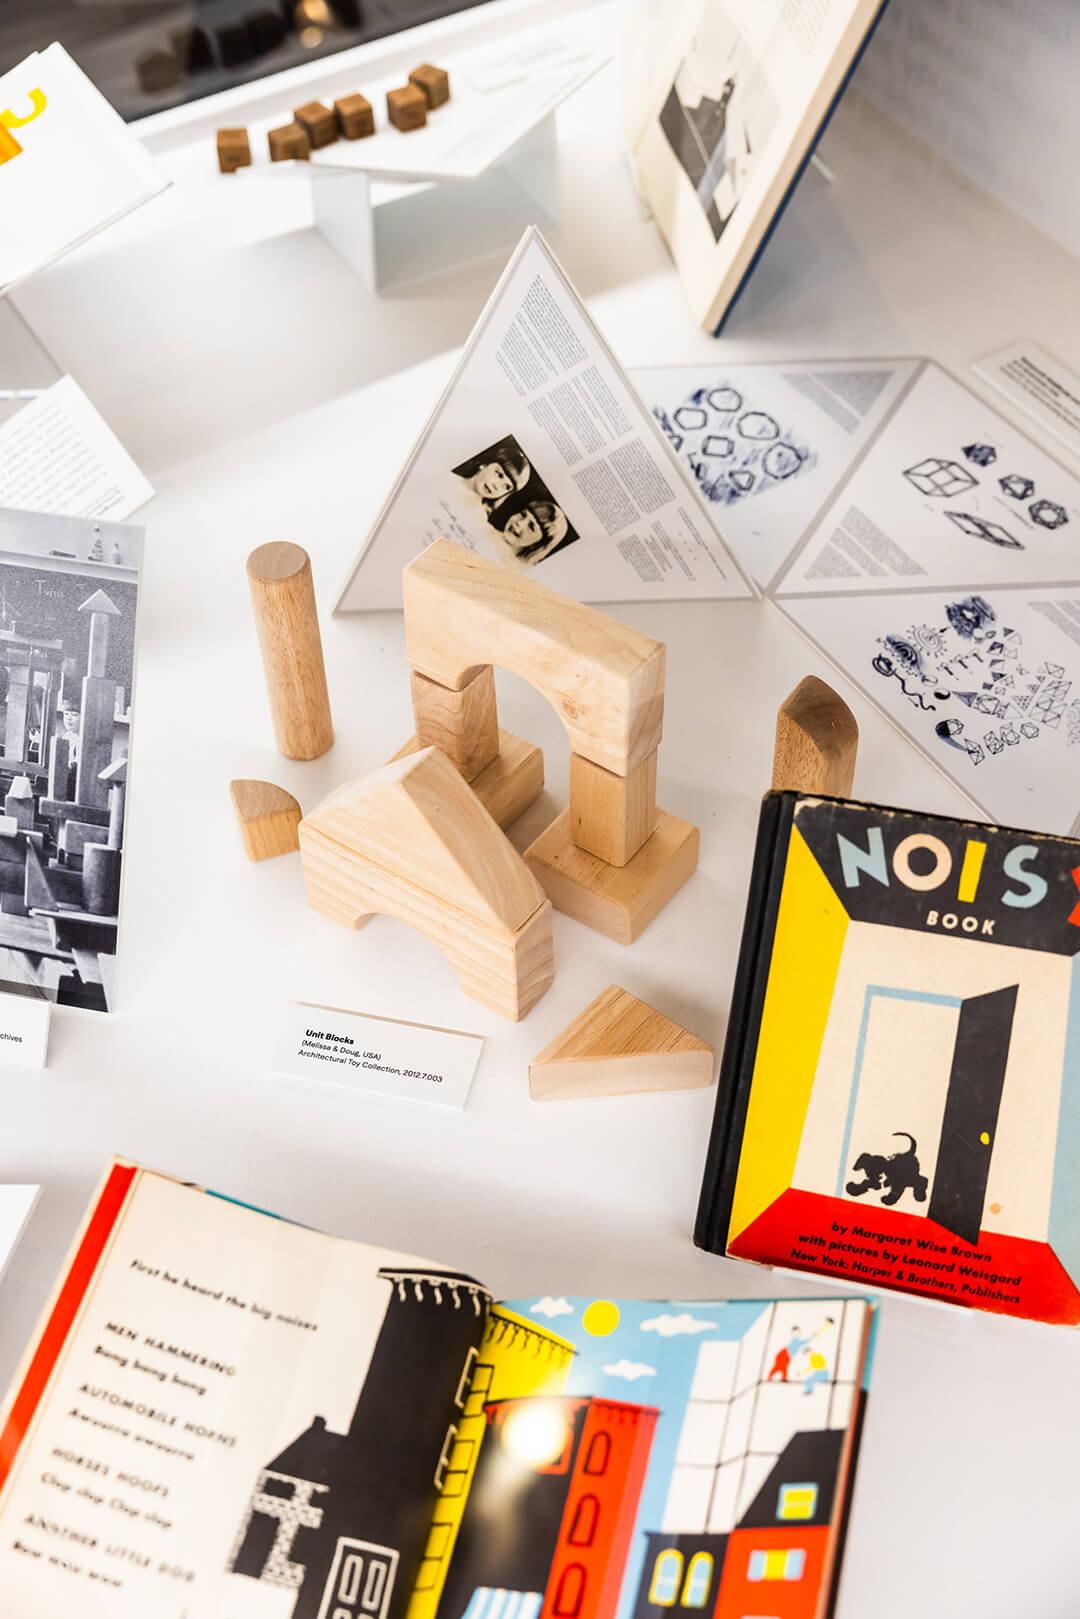 The design exhibition redefines the appeal of children’s literature|Building Stories| National Building Museum| STIRworld